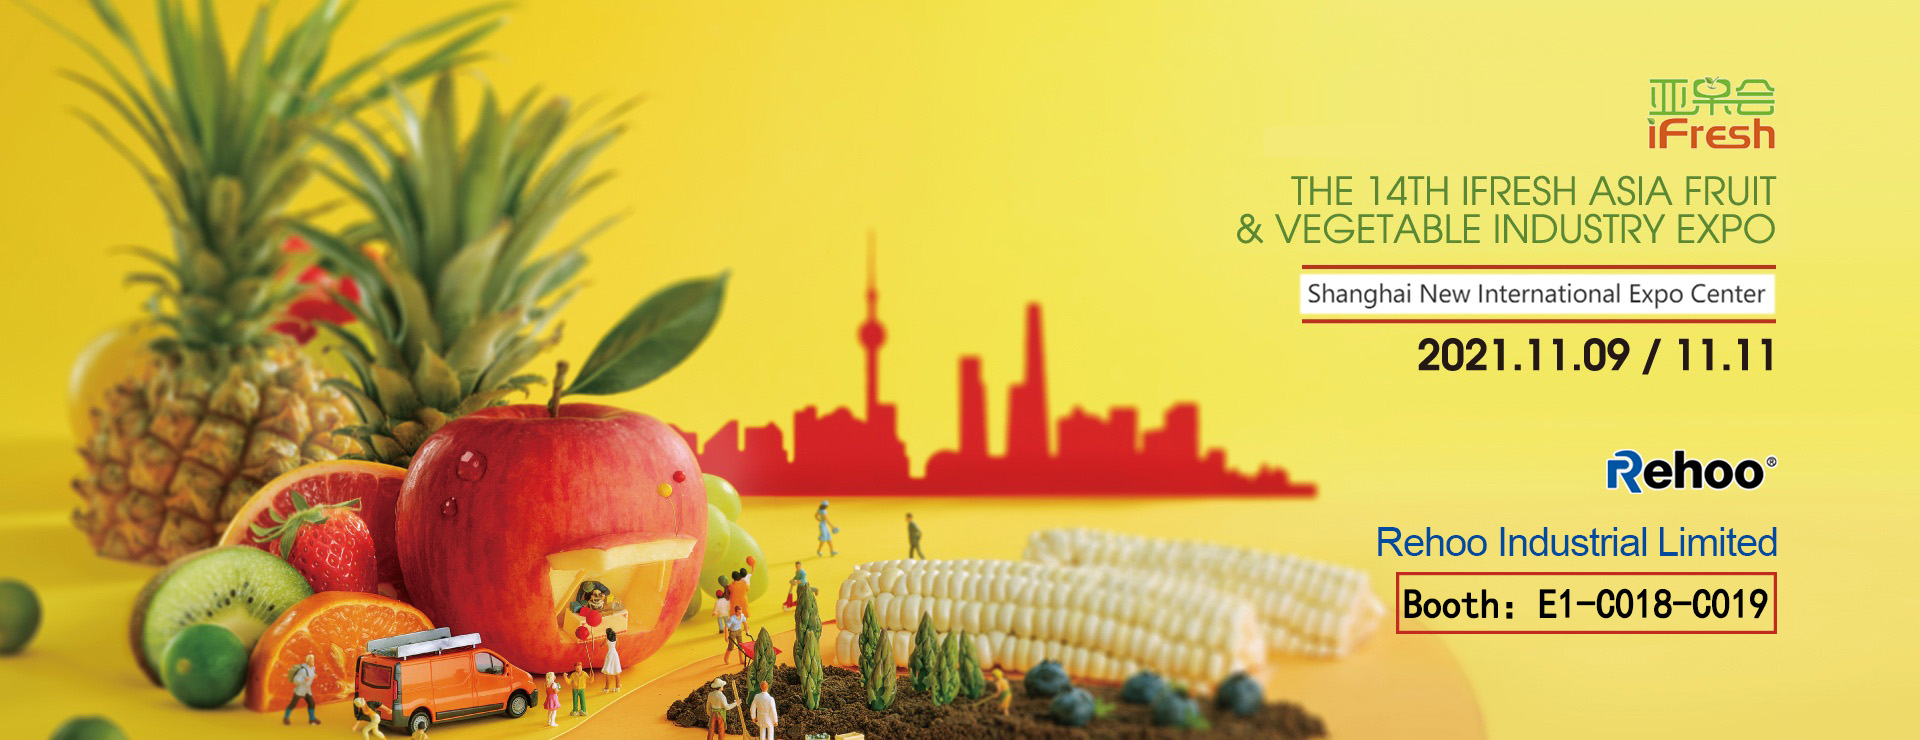 The 14th iFresh Asian Fruit and Vegetable Industry Expo